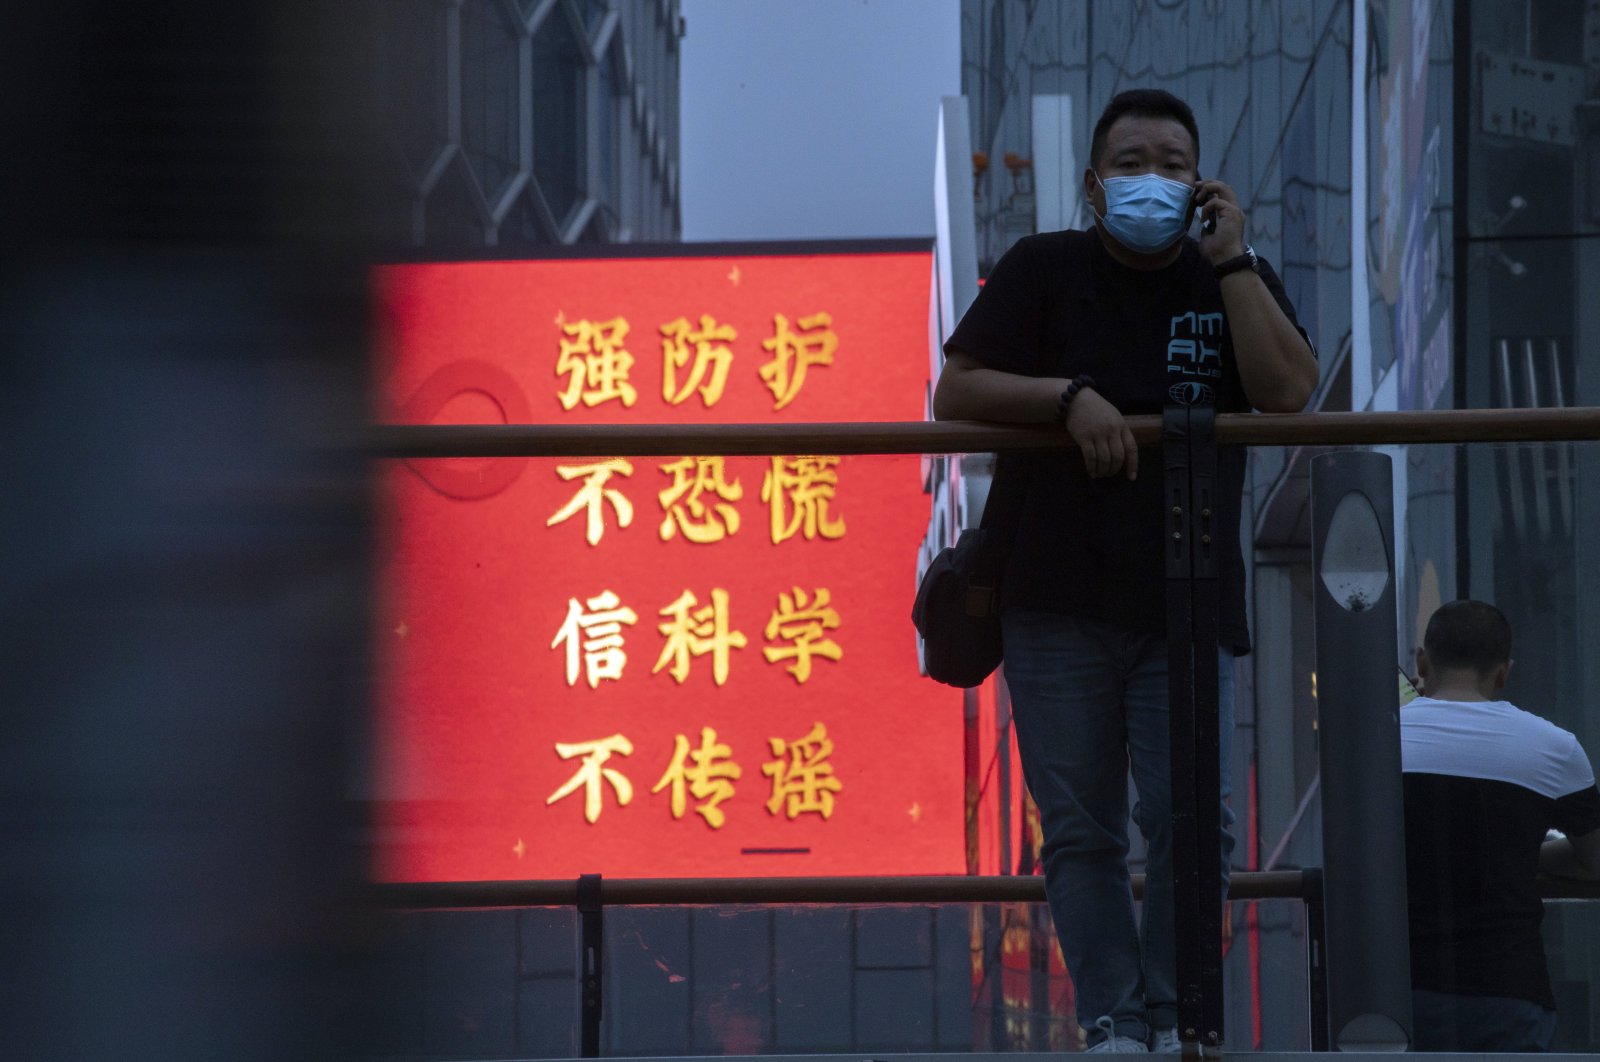 A man wearing a mask to protect from the coronavirus stands near government propaganda against the pandemic which reads "Strengthen Protection, Don't Panic, Believe in Science, Don't spread rumors" in Beijing, Aug. 30, 2020. (AP Photo)